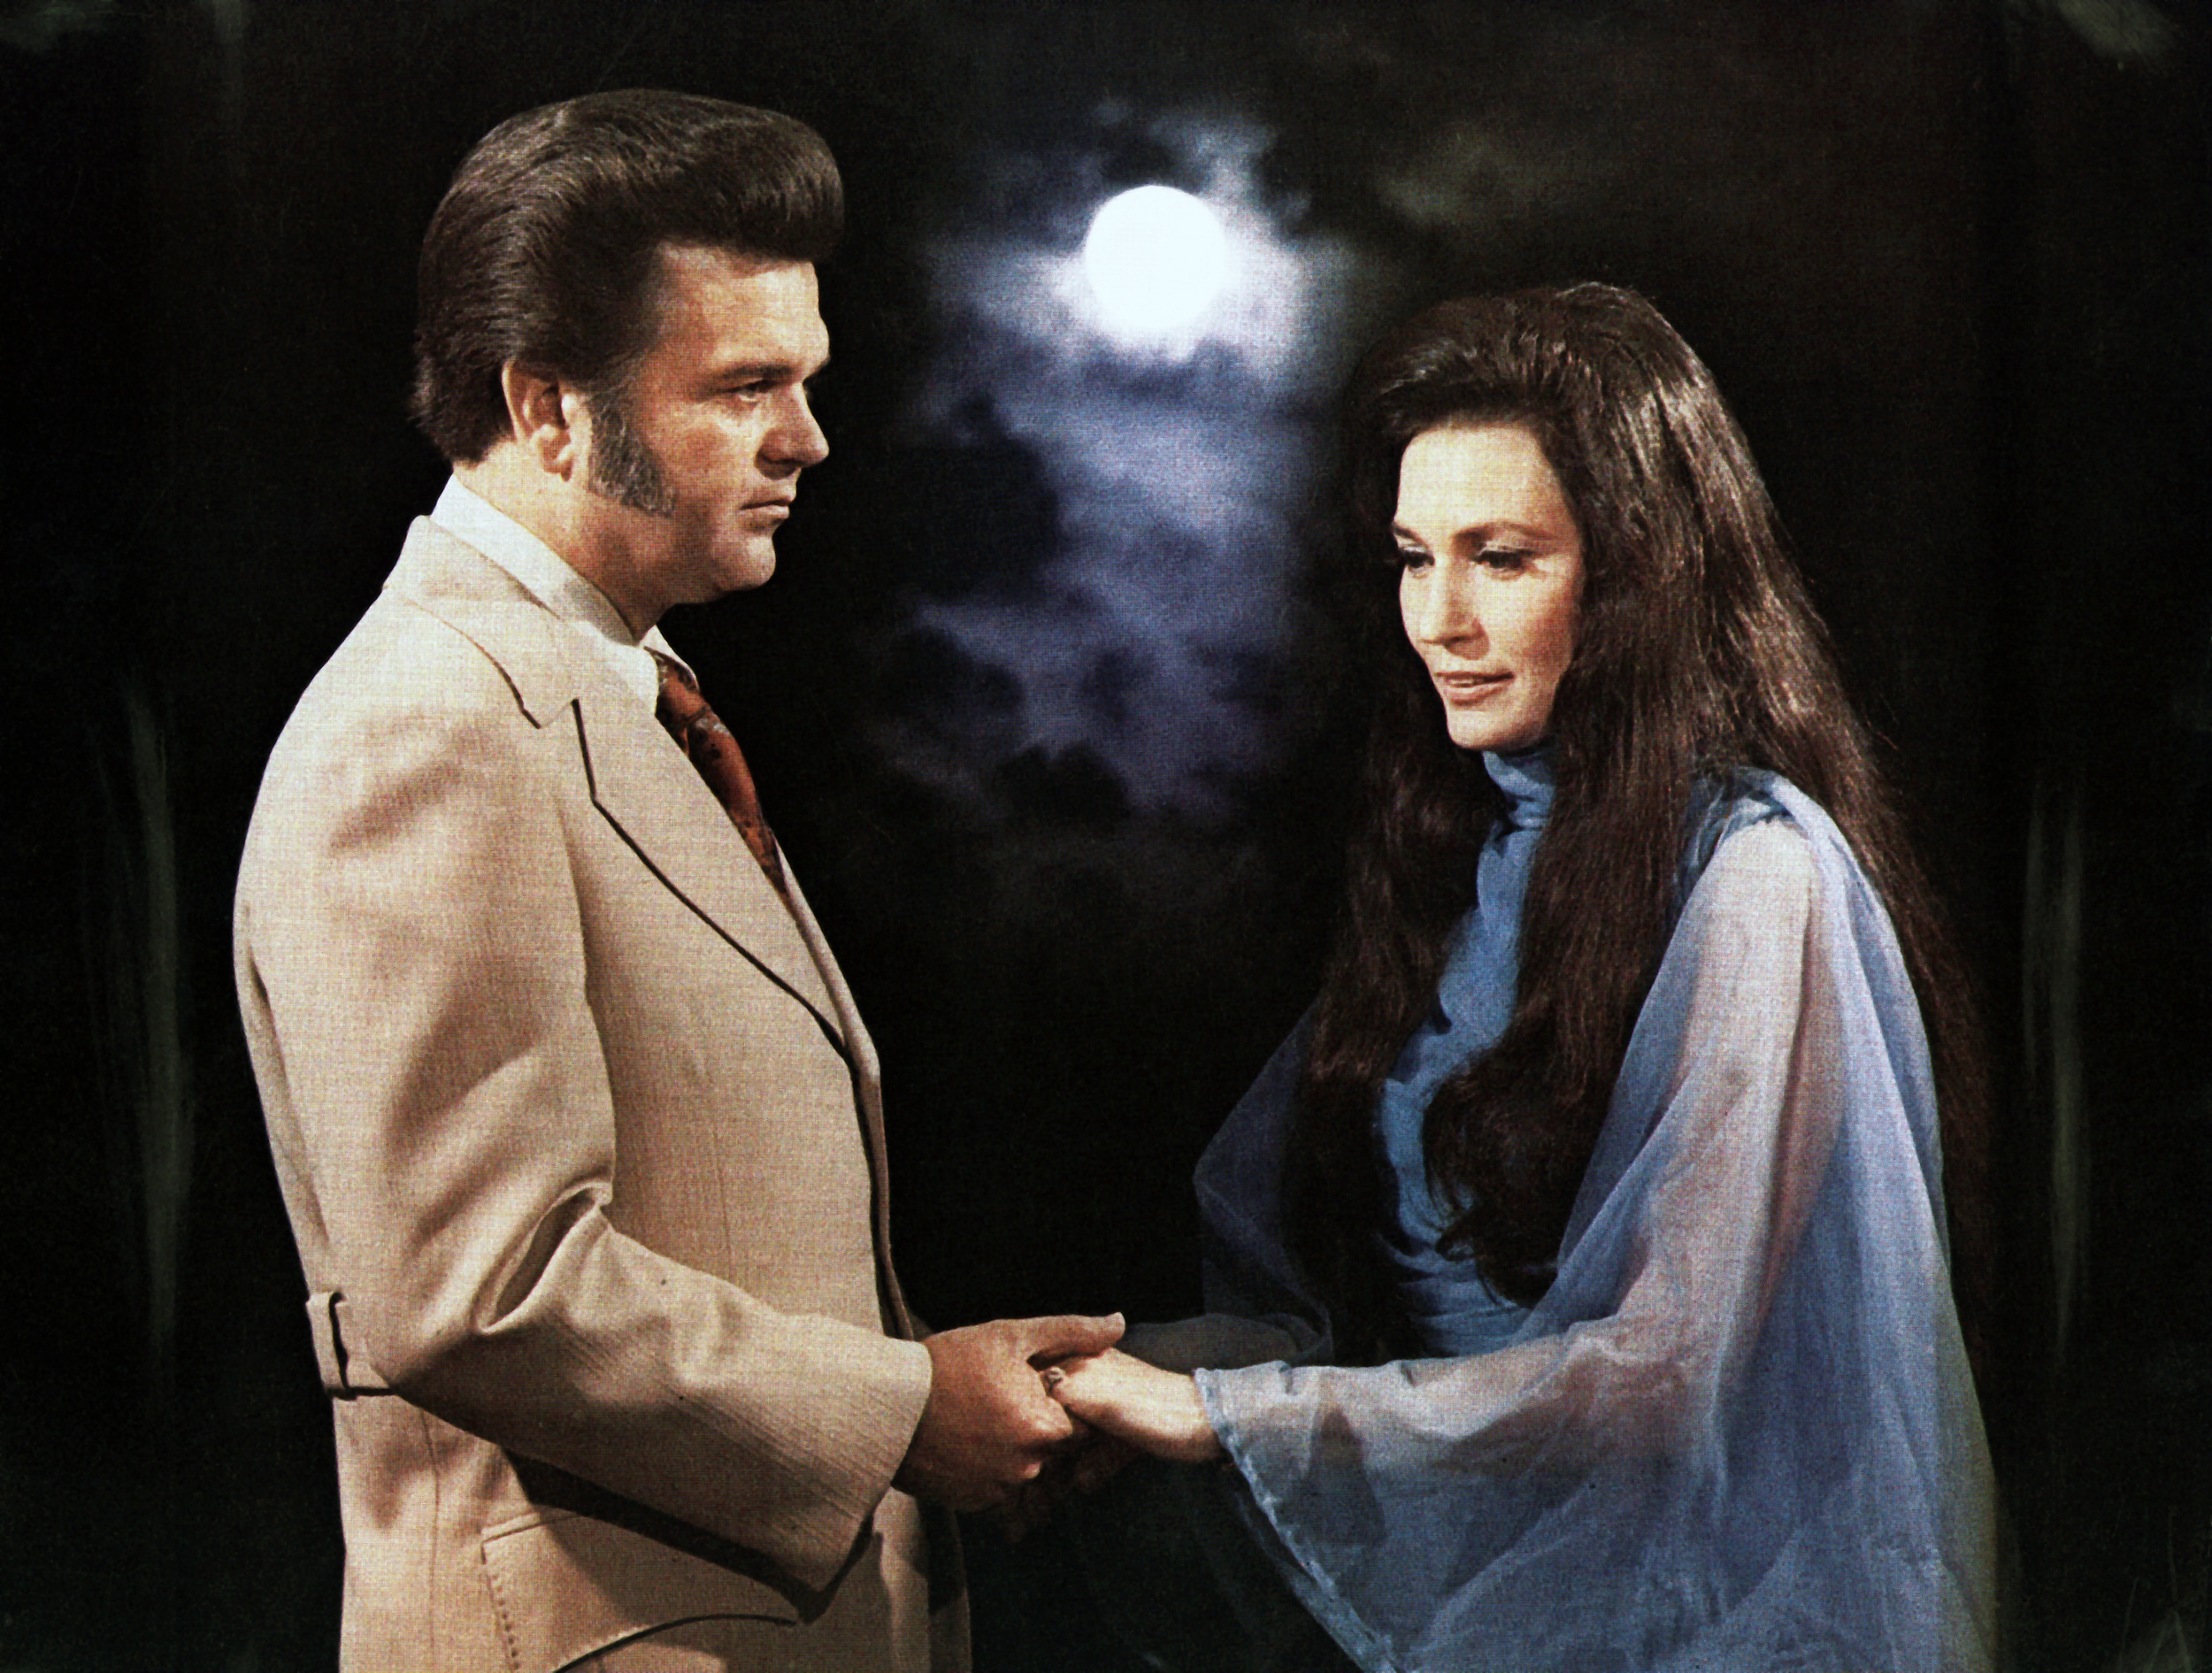 <p>There are few duos in country music more iconic than Loretta Lynn and Conway Twitty, and there are none cheekier than "You're The Reason Our Kids Are Ugly." "You're the reason our kids are ugly, little darling," the duo sings. "Ah, but looks ain't everything, and money ain't everything, but I love you just the same."</p><p>You may also like: <a href='https://www.yardbarker.com/entertainment/articles/the_20_most_iconic_episodes_of_spongebob_squarepants/s1__38867003'>The 20 most iconic episodes of ‘SpongeBob SquarePants’</a></p>